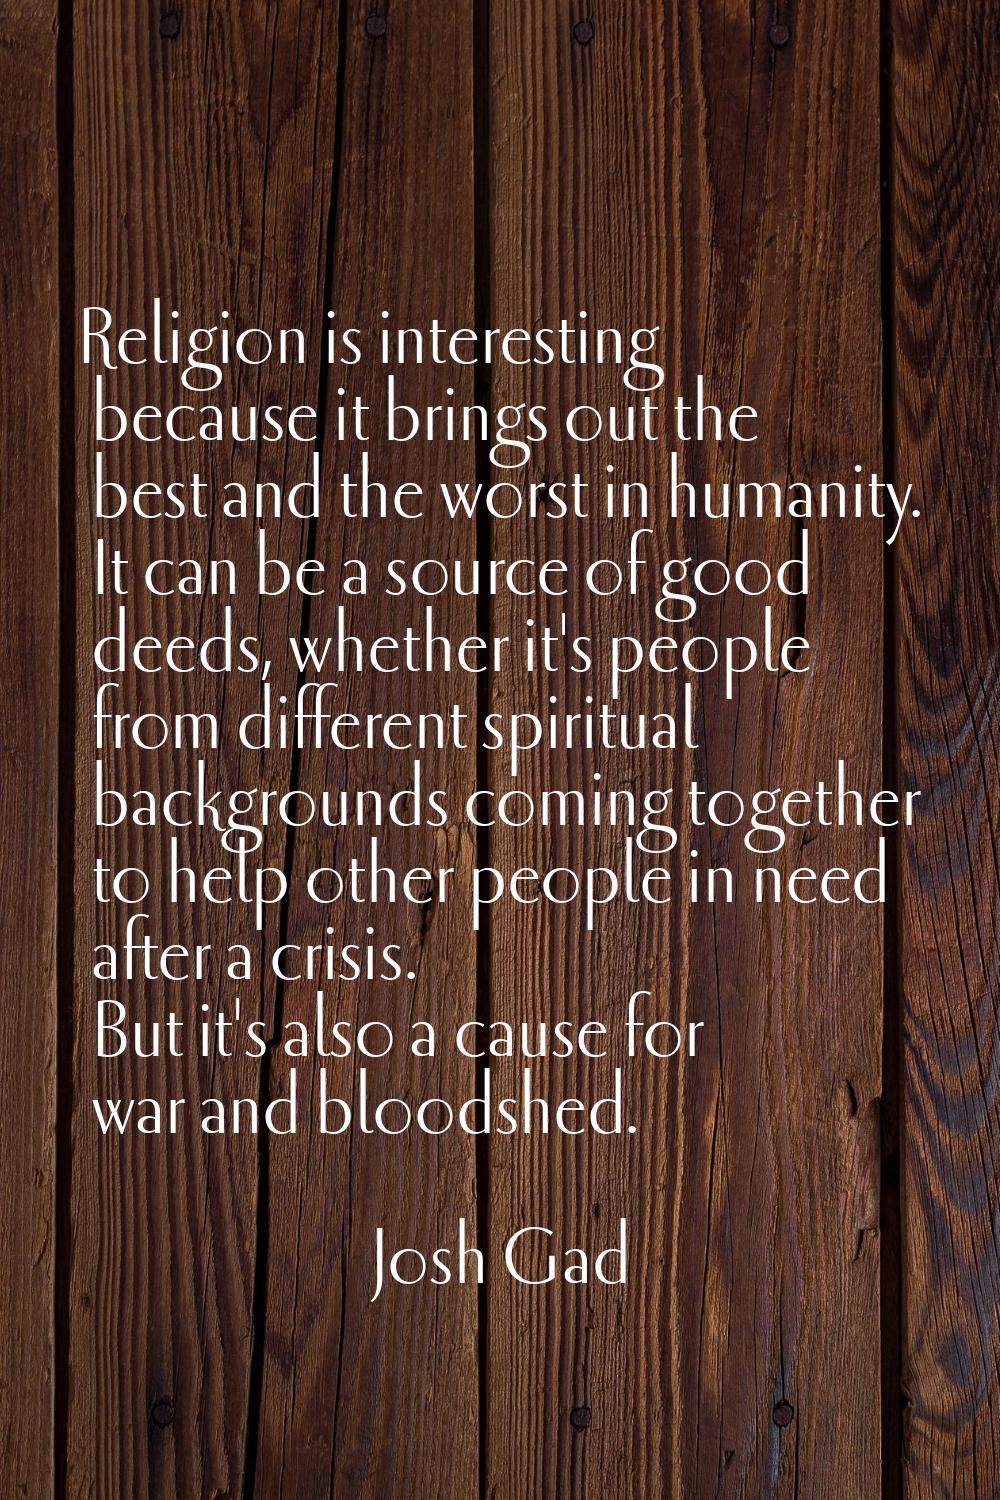 Religion is interesting because it brings out the best and the worst in humanity. It can be a sourc